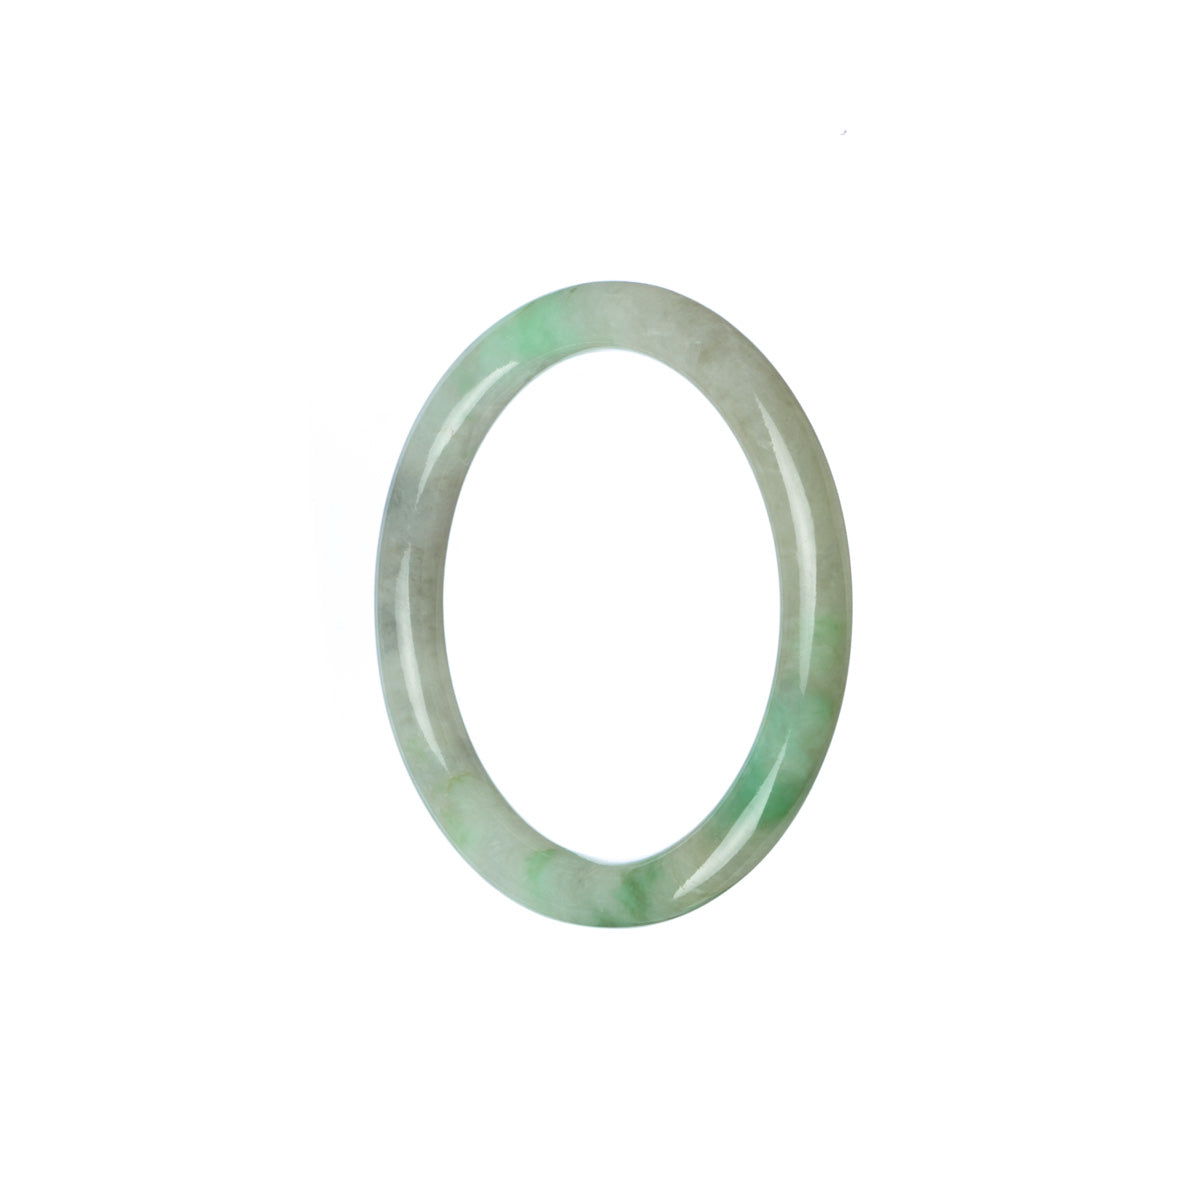 A child-sized round jade bangle bracelet made of genuine untreated green and white jadeite jade. Perfect for adding a touch of elegance to any outfit.